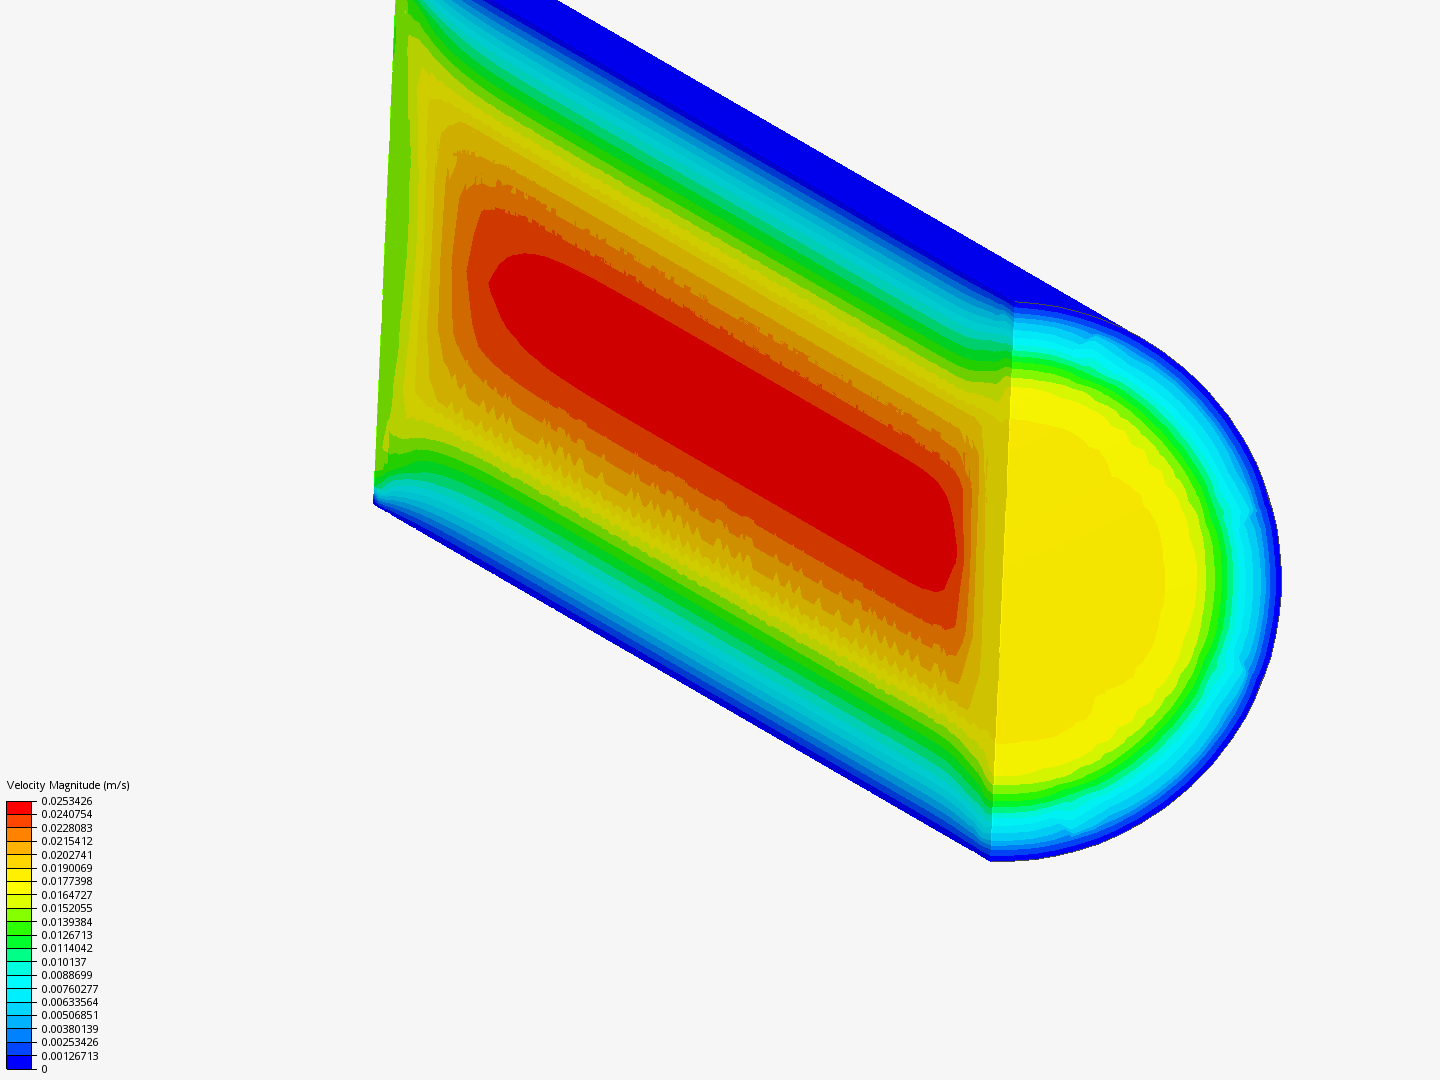 Laminar flow in a pipe image